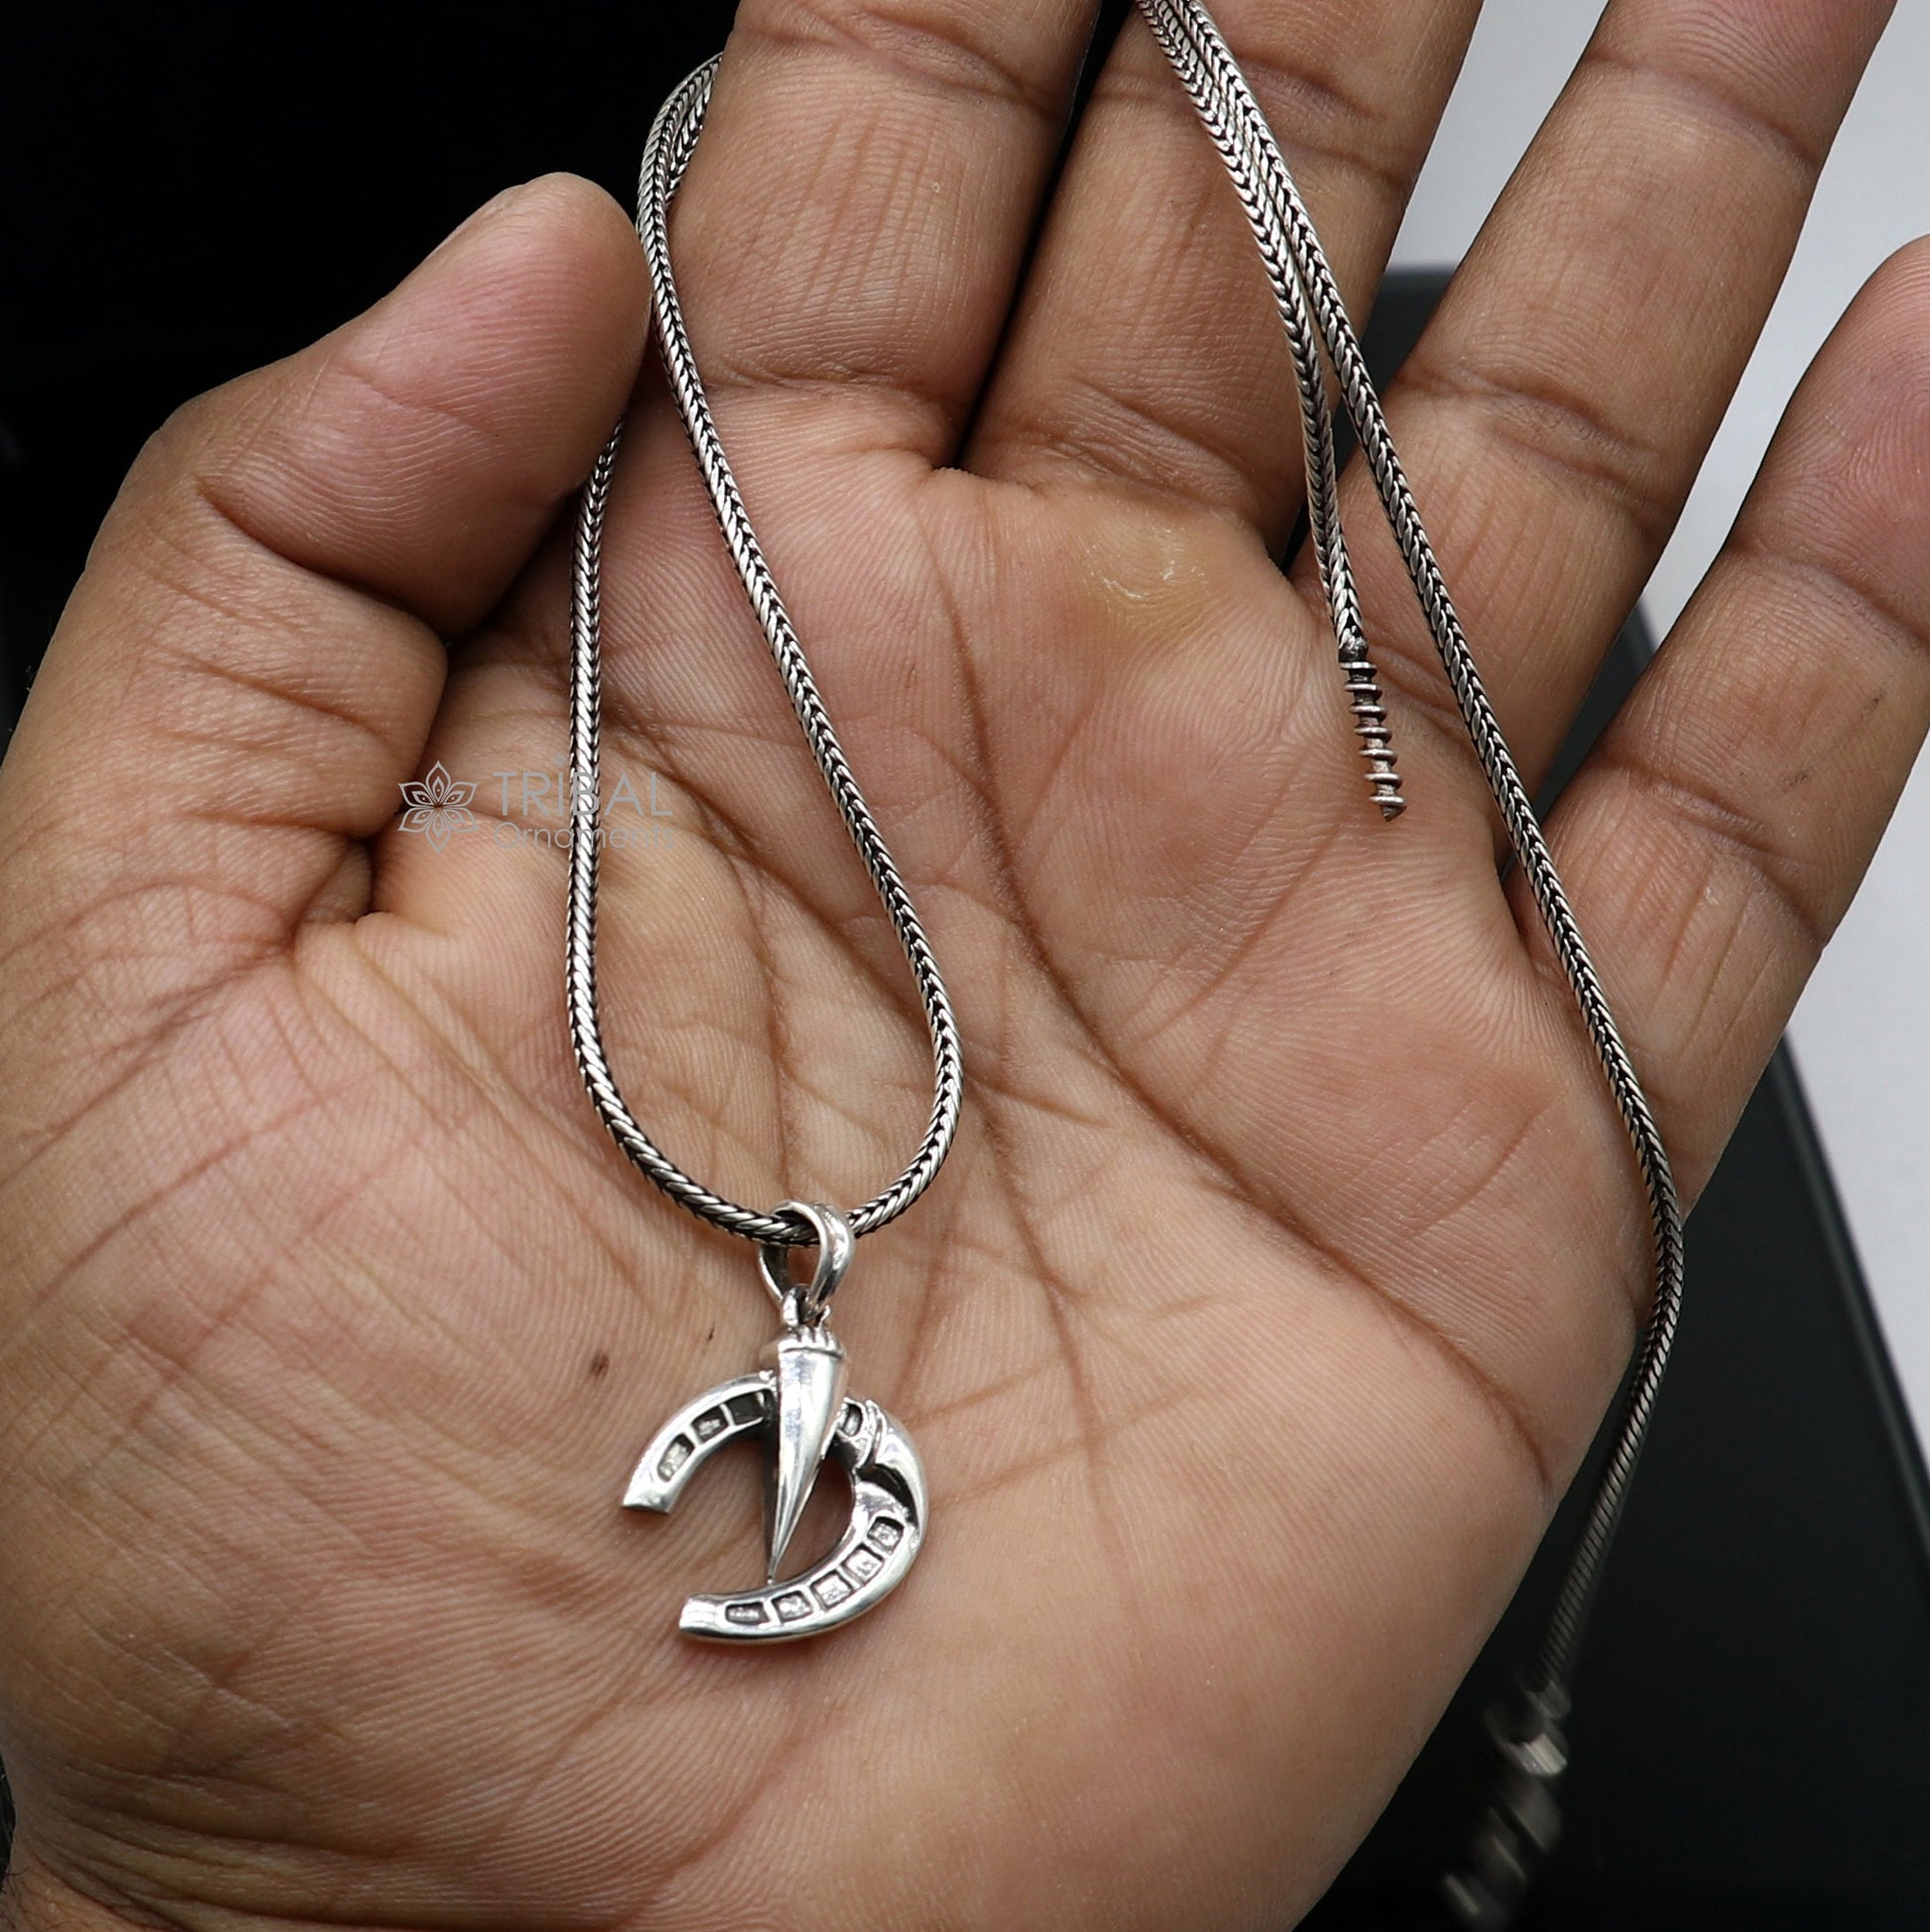 Amazing 925 sterling silver handmade horseshoe design pendant, high quality silver small pendant for boys and girls, charm pendant  nsp668 - TRIBAL ORNAMENTS